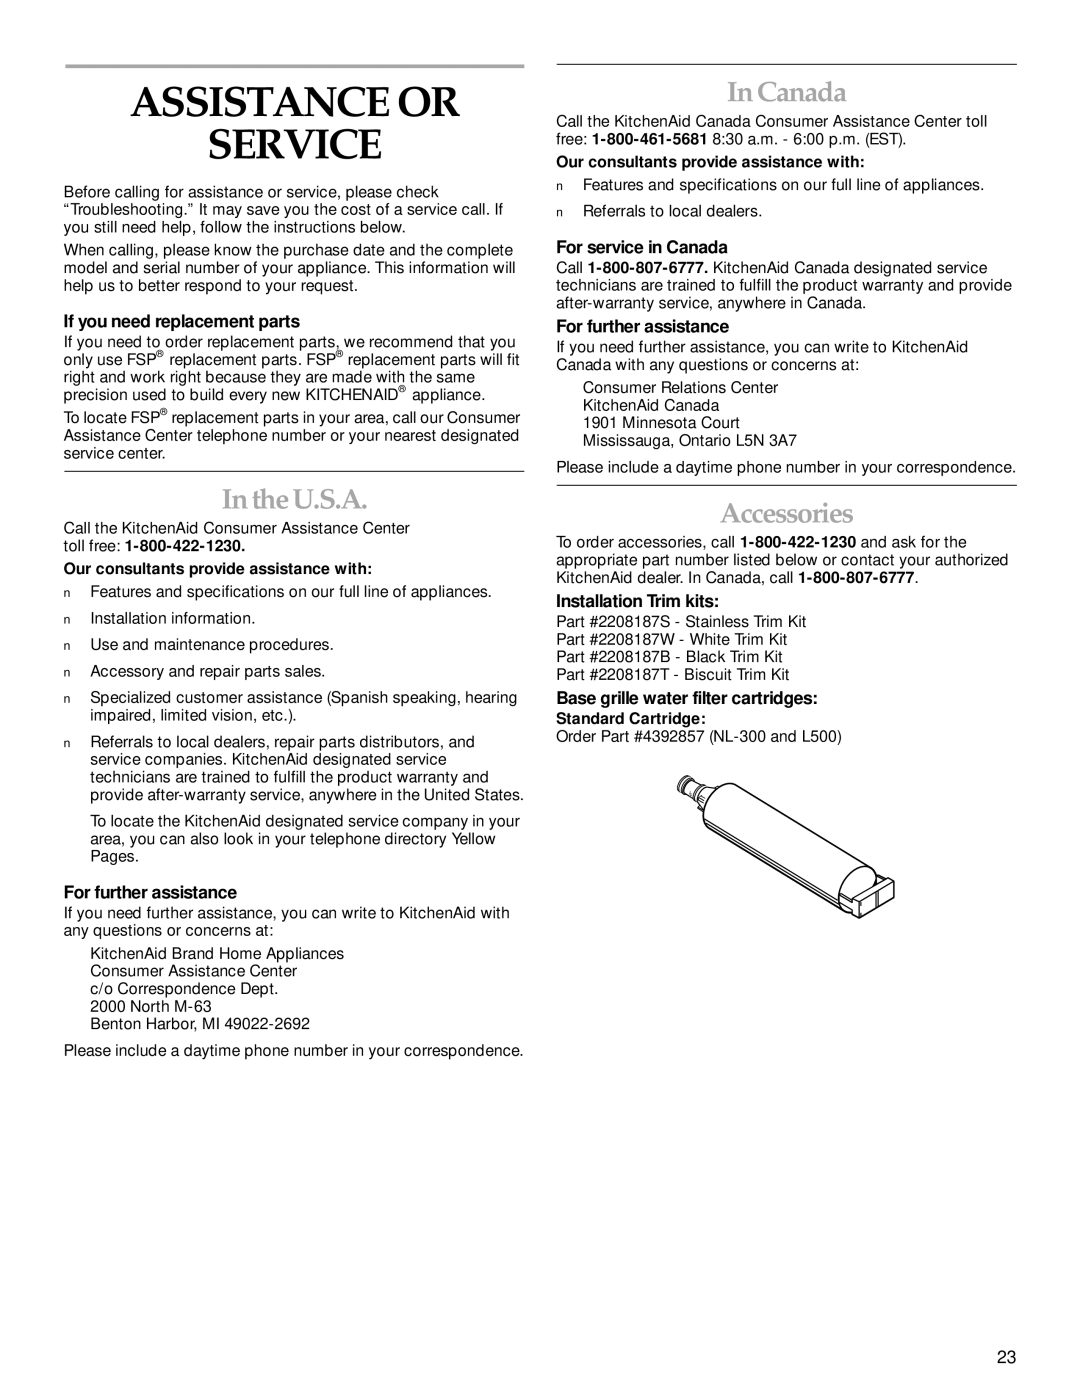 KitchenAid Cabinet Depth Side-by-Side Refrigerator manual Assistance or Service, U.S.A, Canada, Accessories 